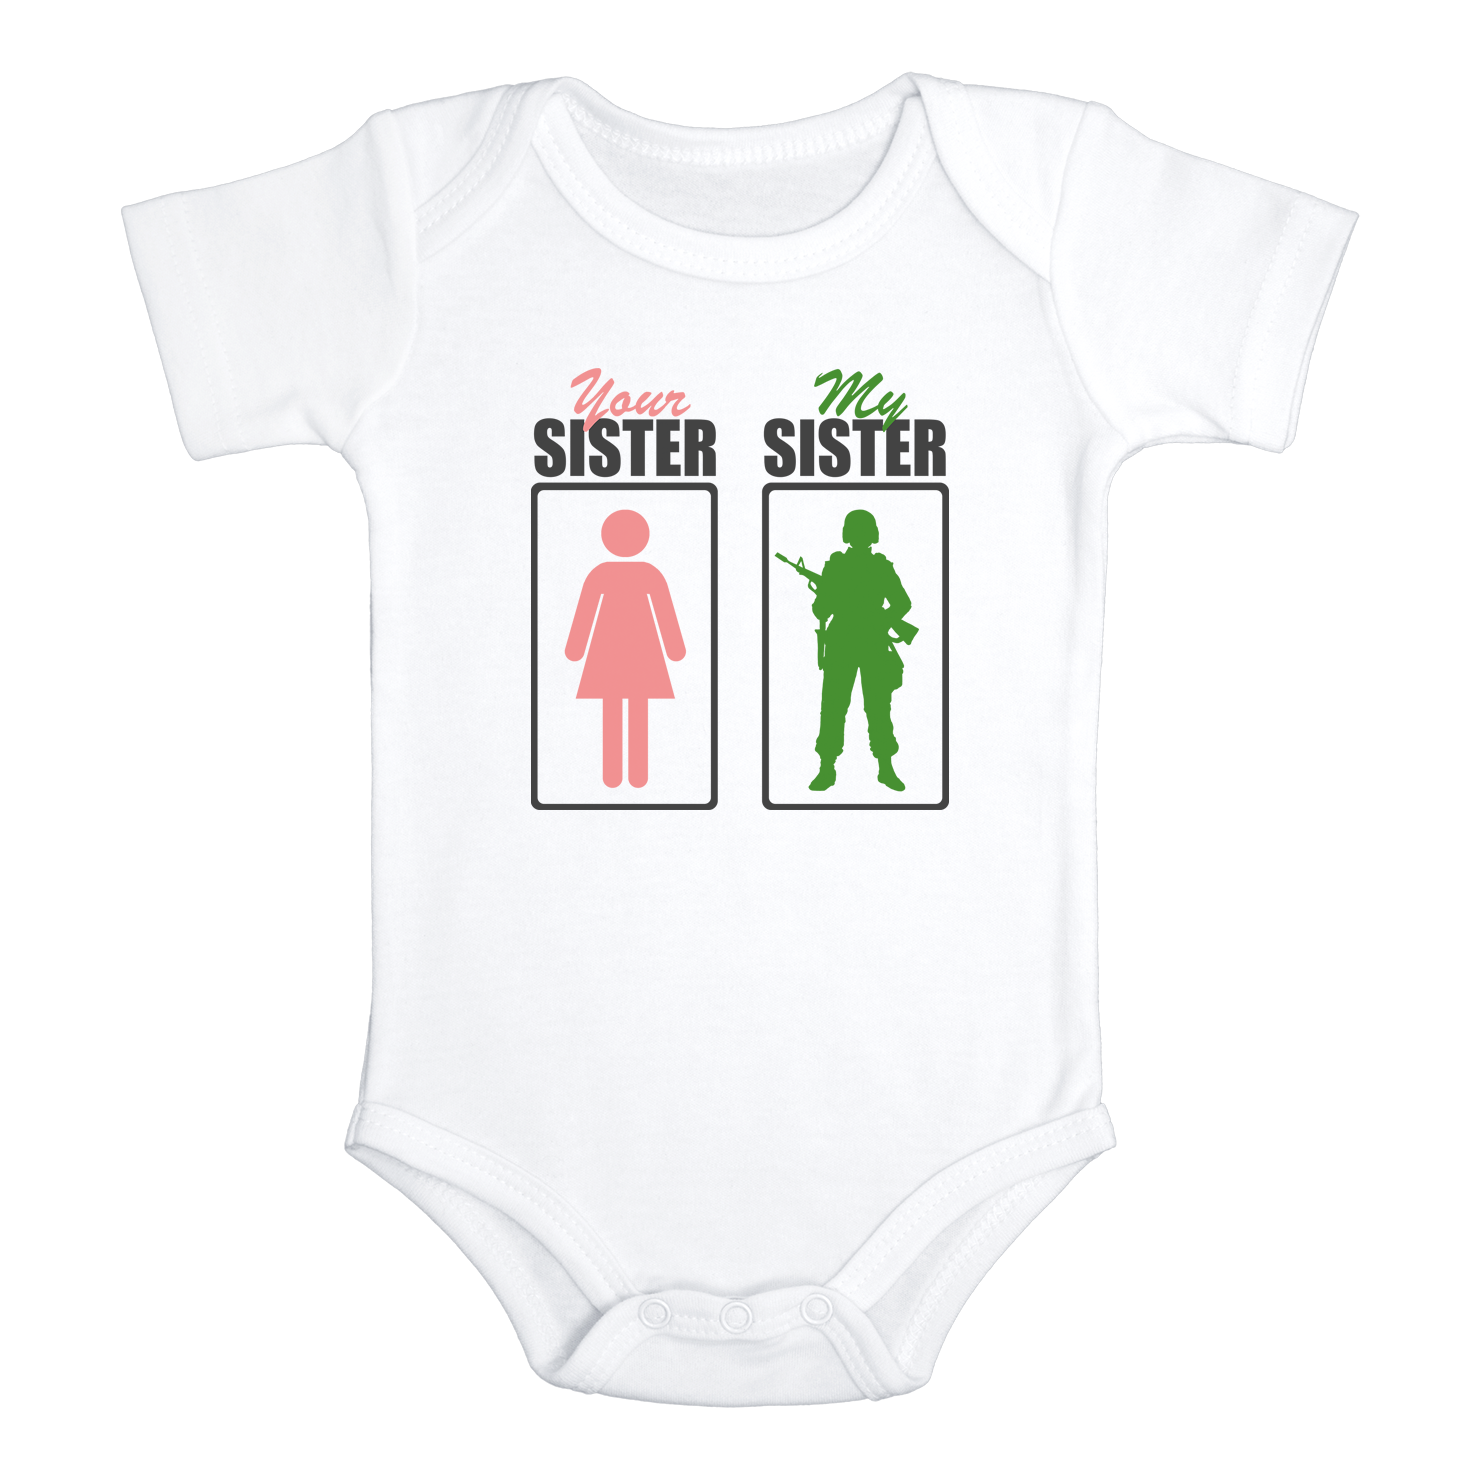 YOUR SISTER MY SISTER Funny Military Baby Bodysuit/White Onesie - HappyAddition